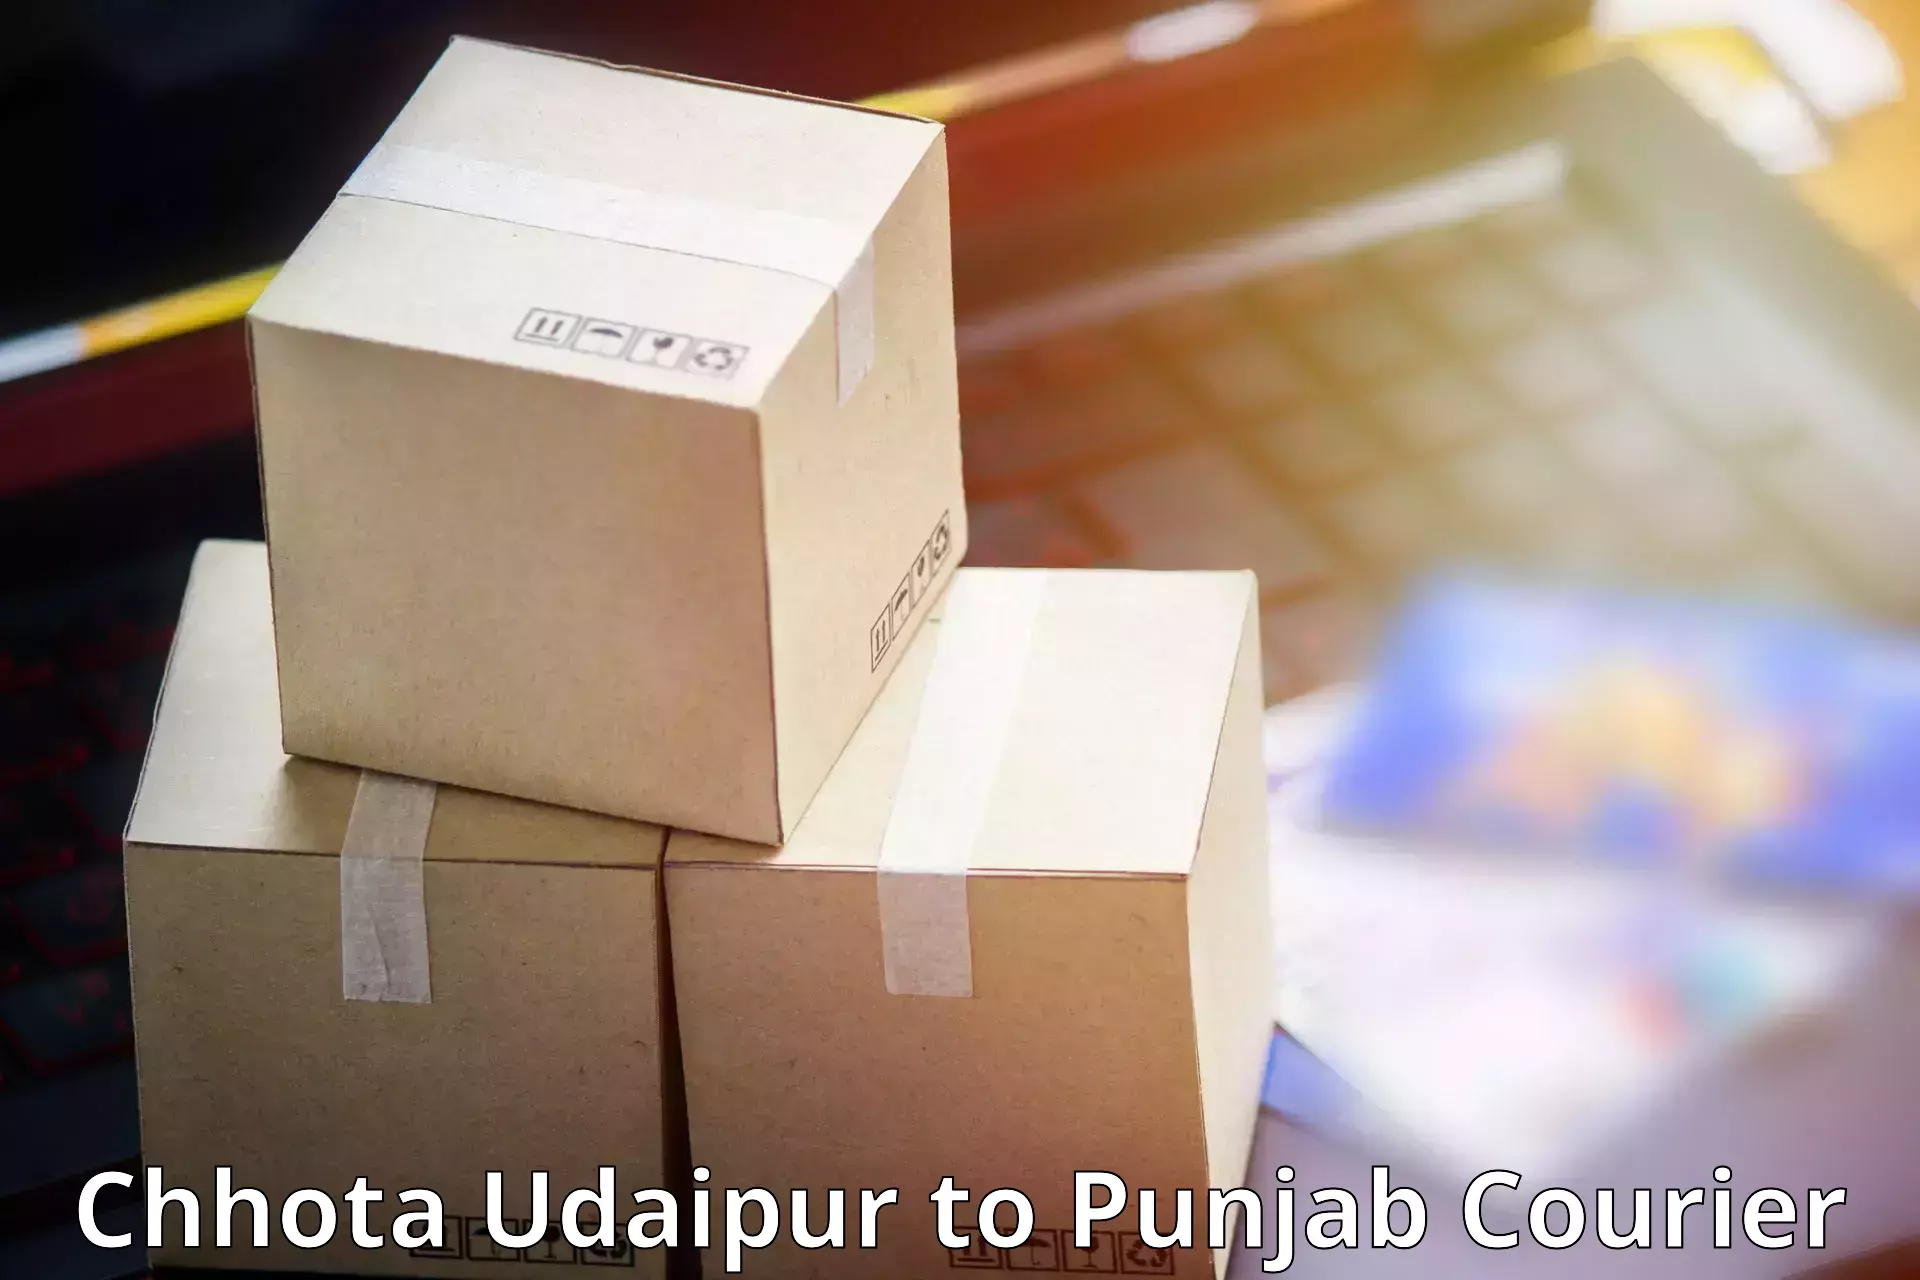 Parcel handling and care Chhota Udaipur to Faridkot